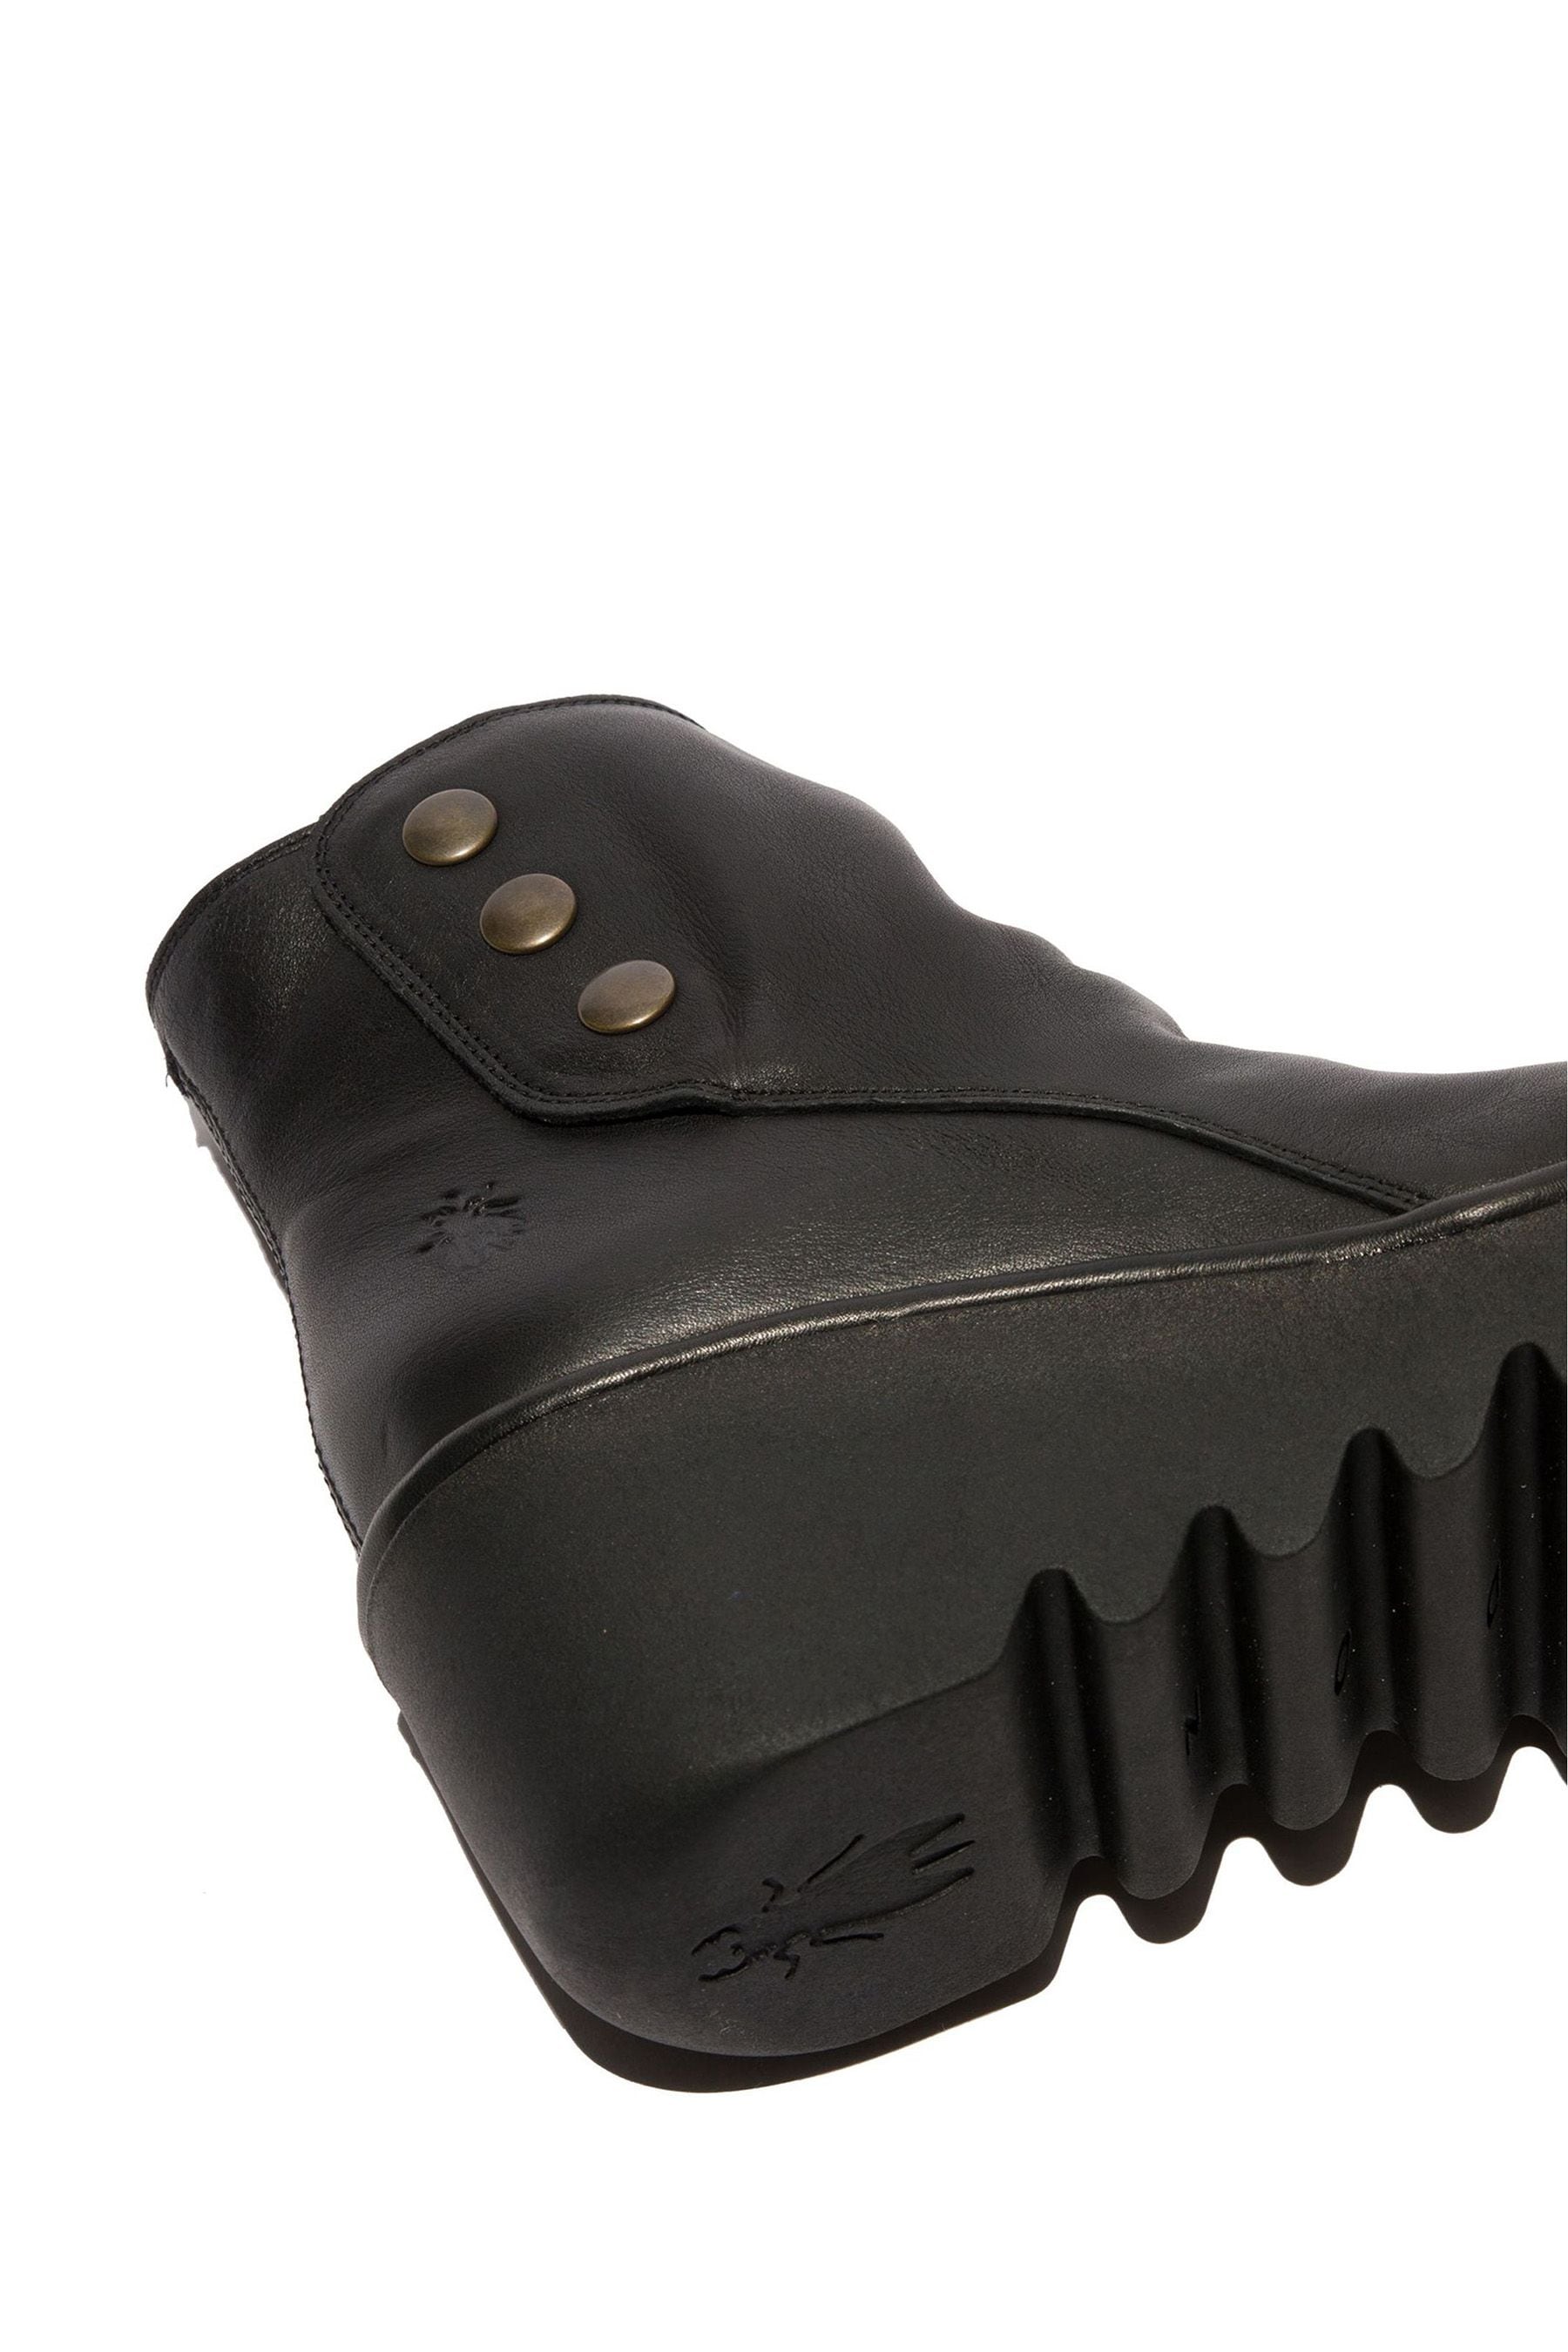 Buy Fly London Brom Black Wedge Boots from the Next UK online shop